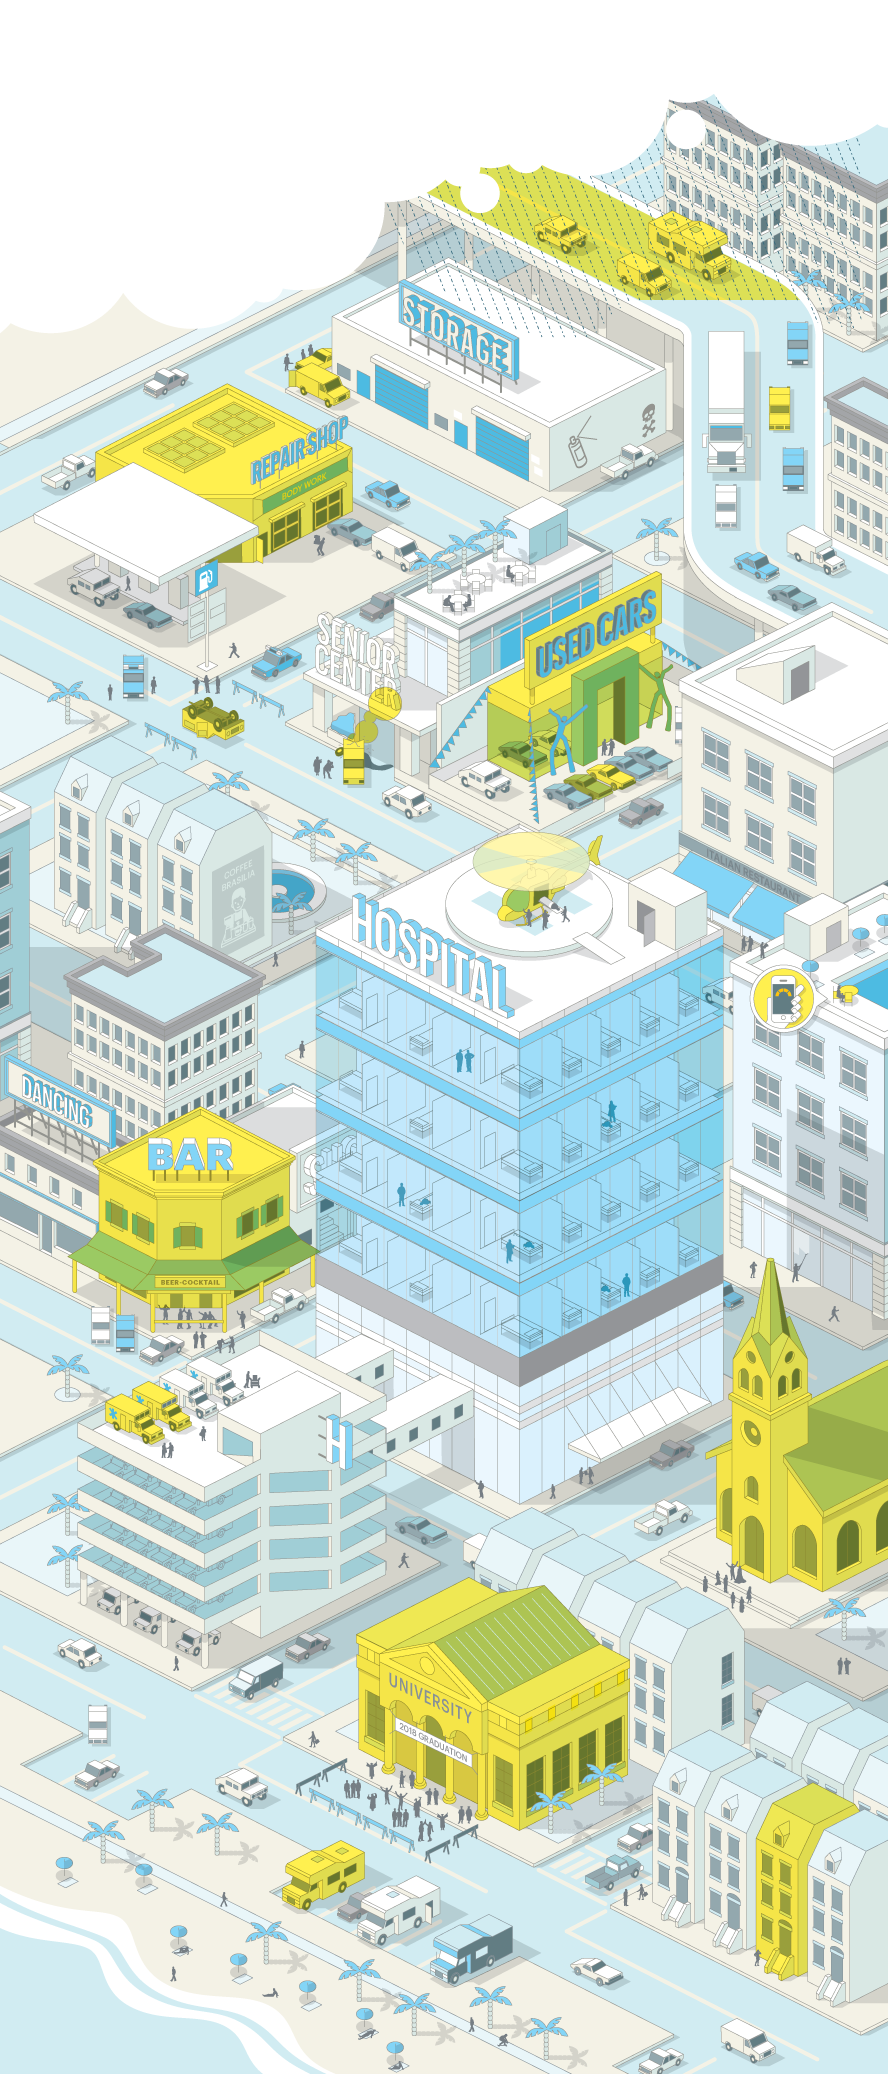 Infographic shows an isometric urban landscape, highlights factors that affect insurance prices